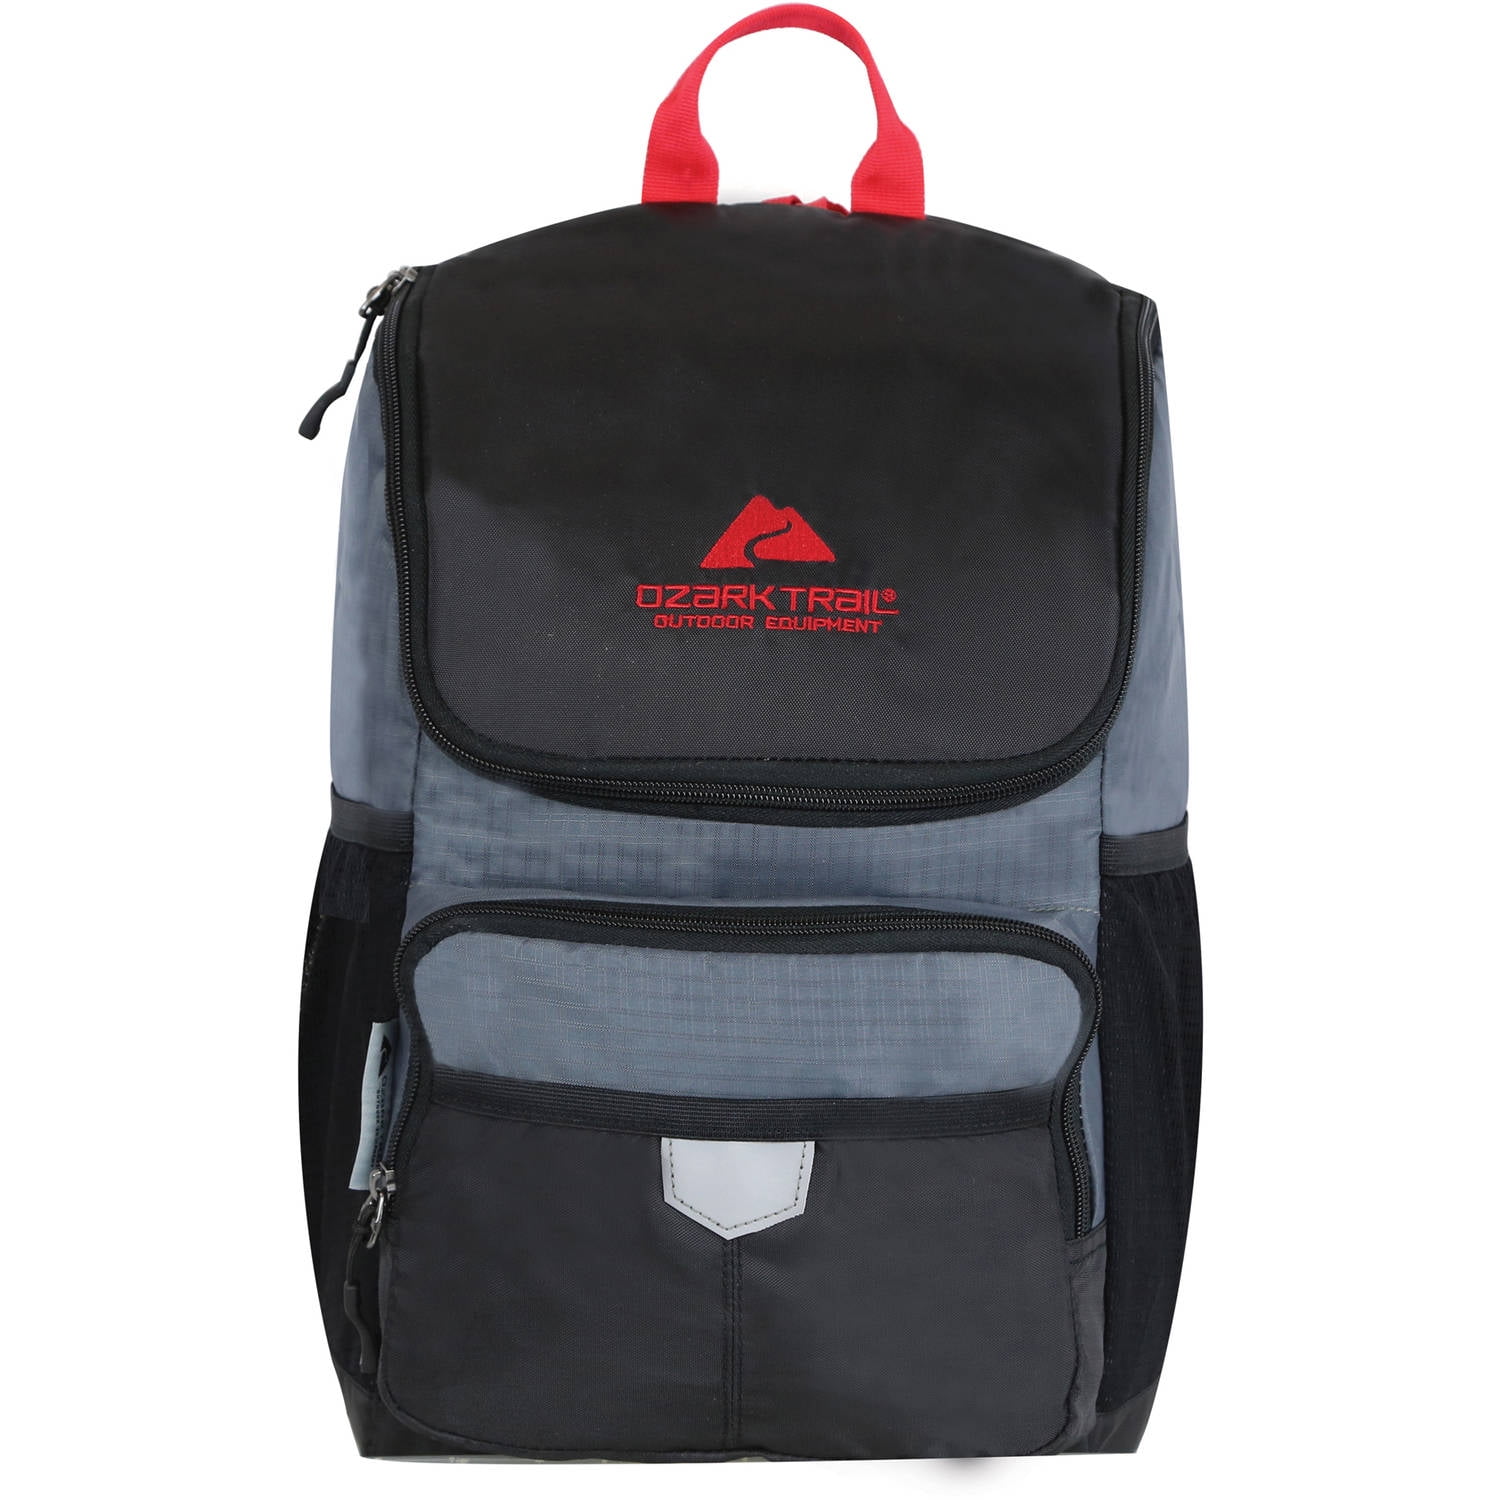 cooler backpack with laptop compartment